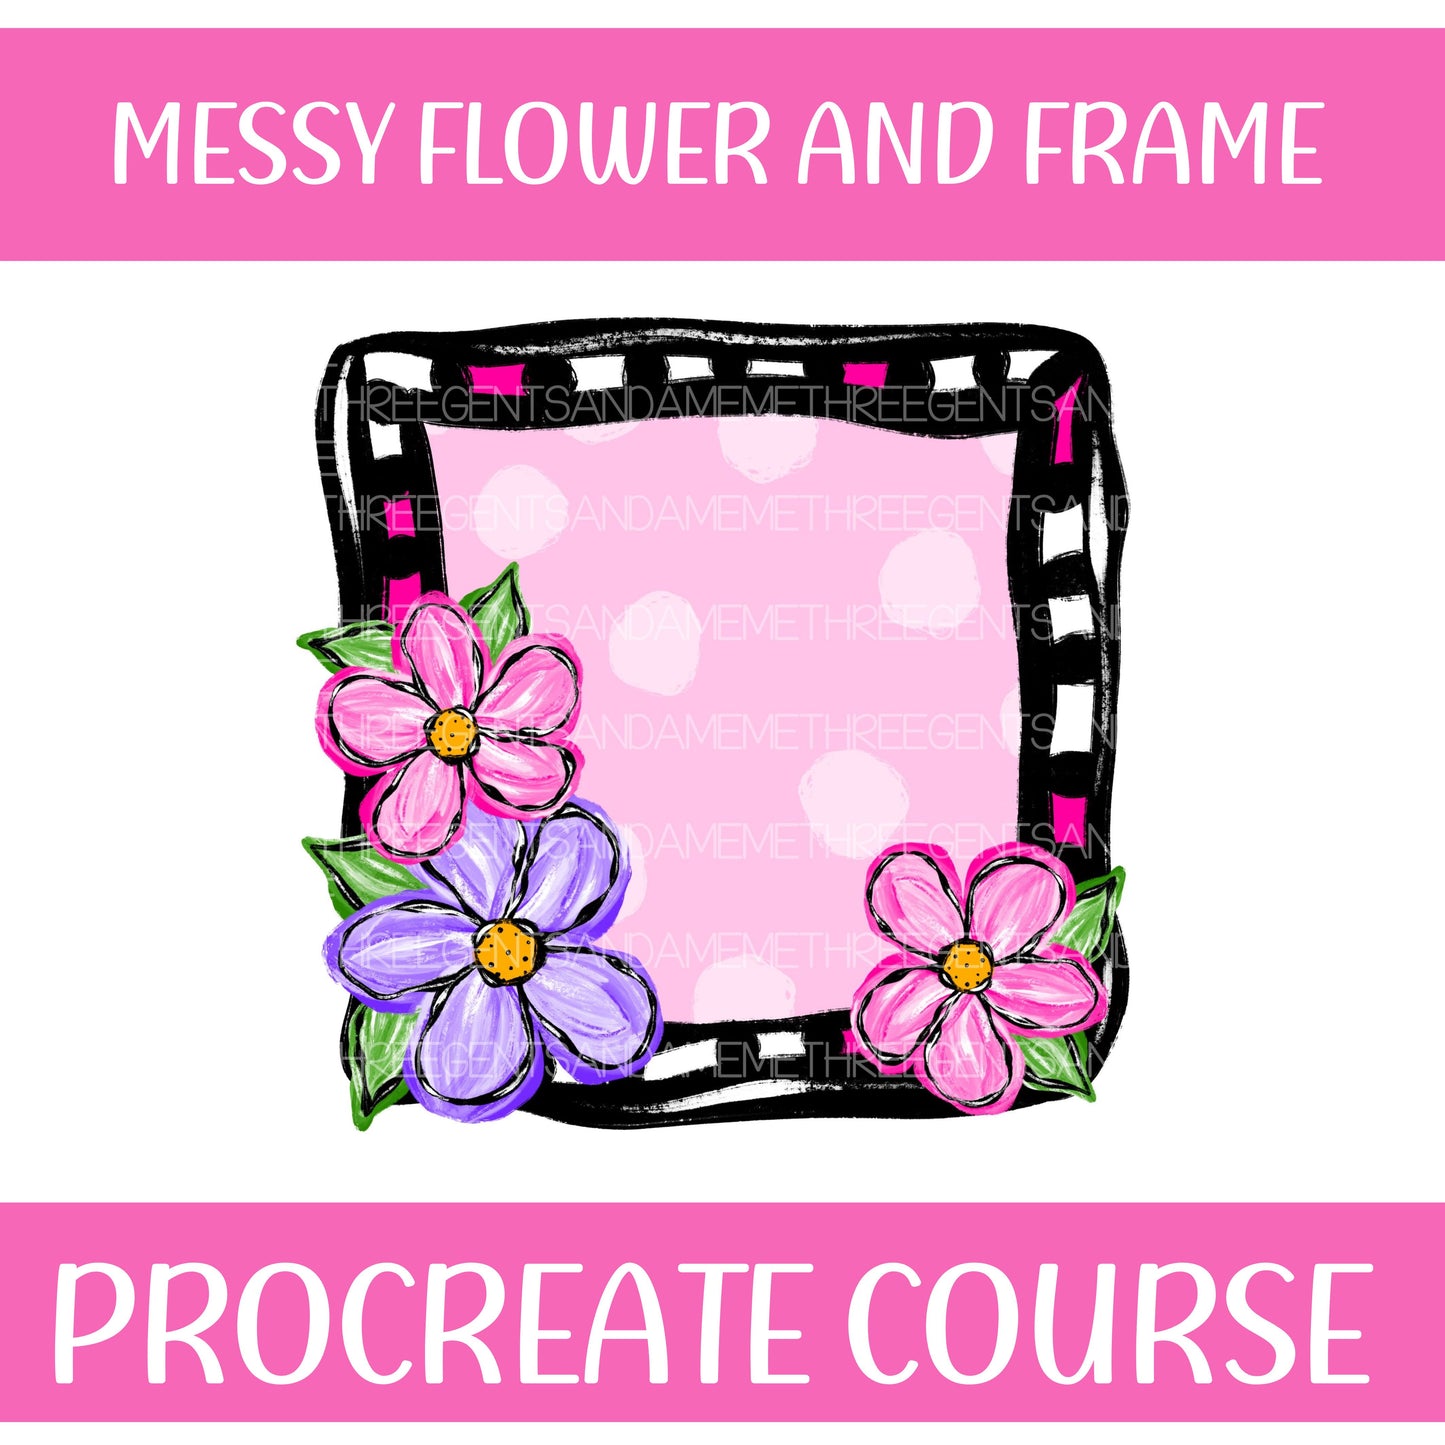 MESSY FLOWER AND FRAME PROCREATE COURSE